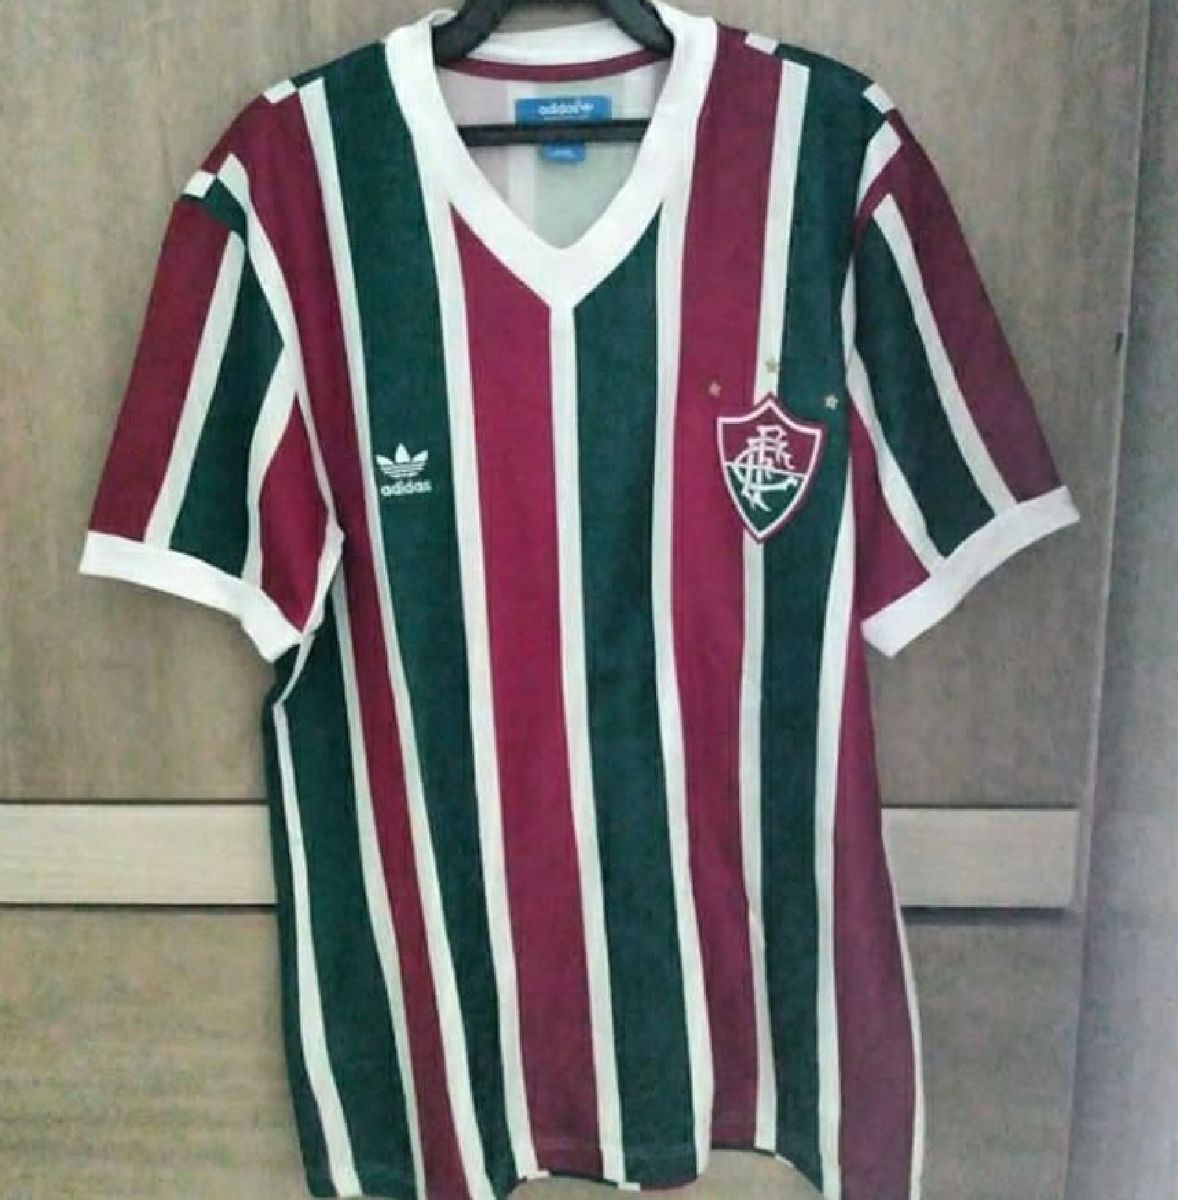 Watery Dental Deny Camisa Adidas Do Fluminense Store, 56% OFF | www.champagne-coquillette.fr